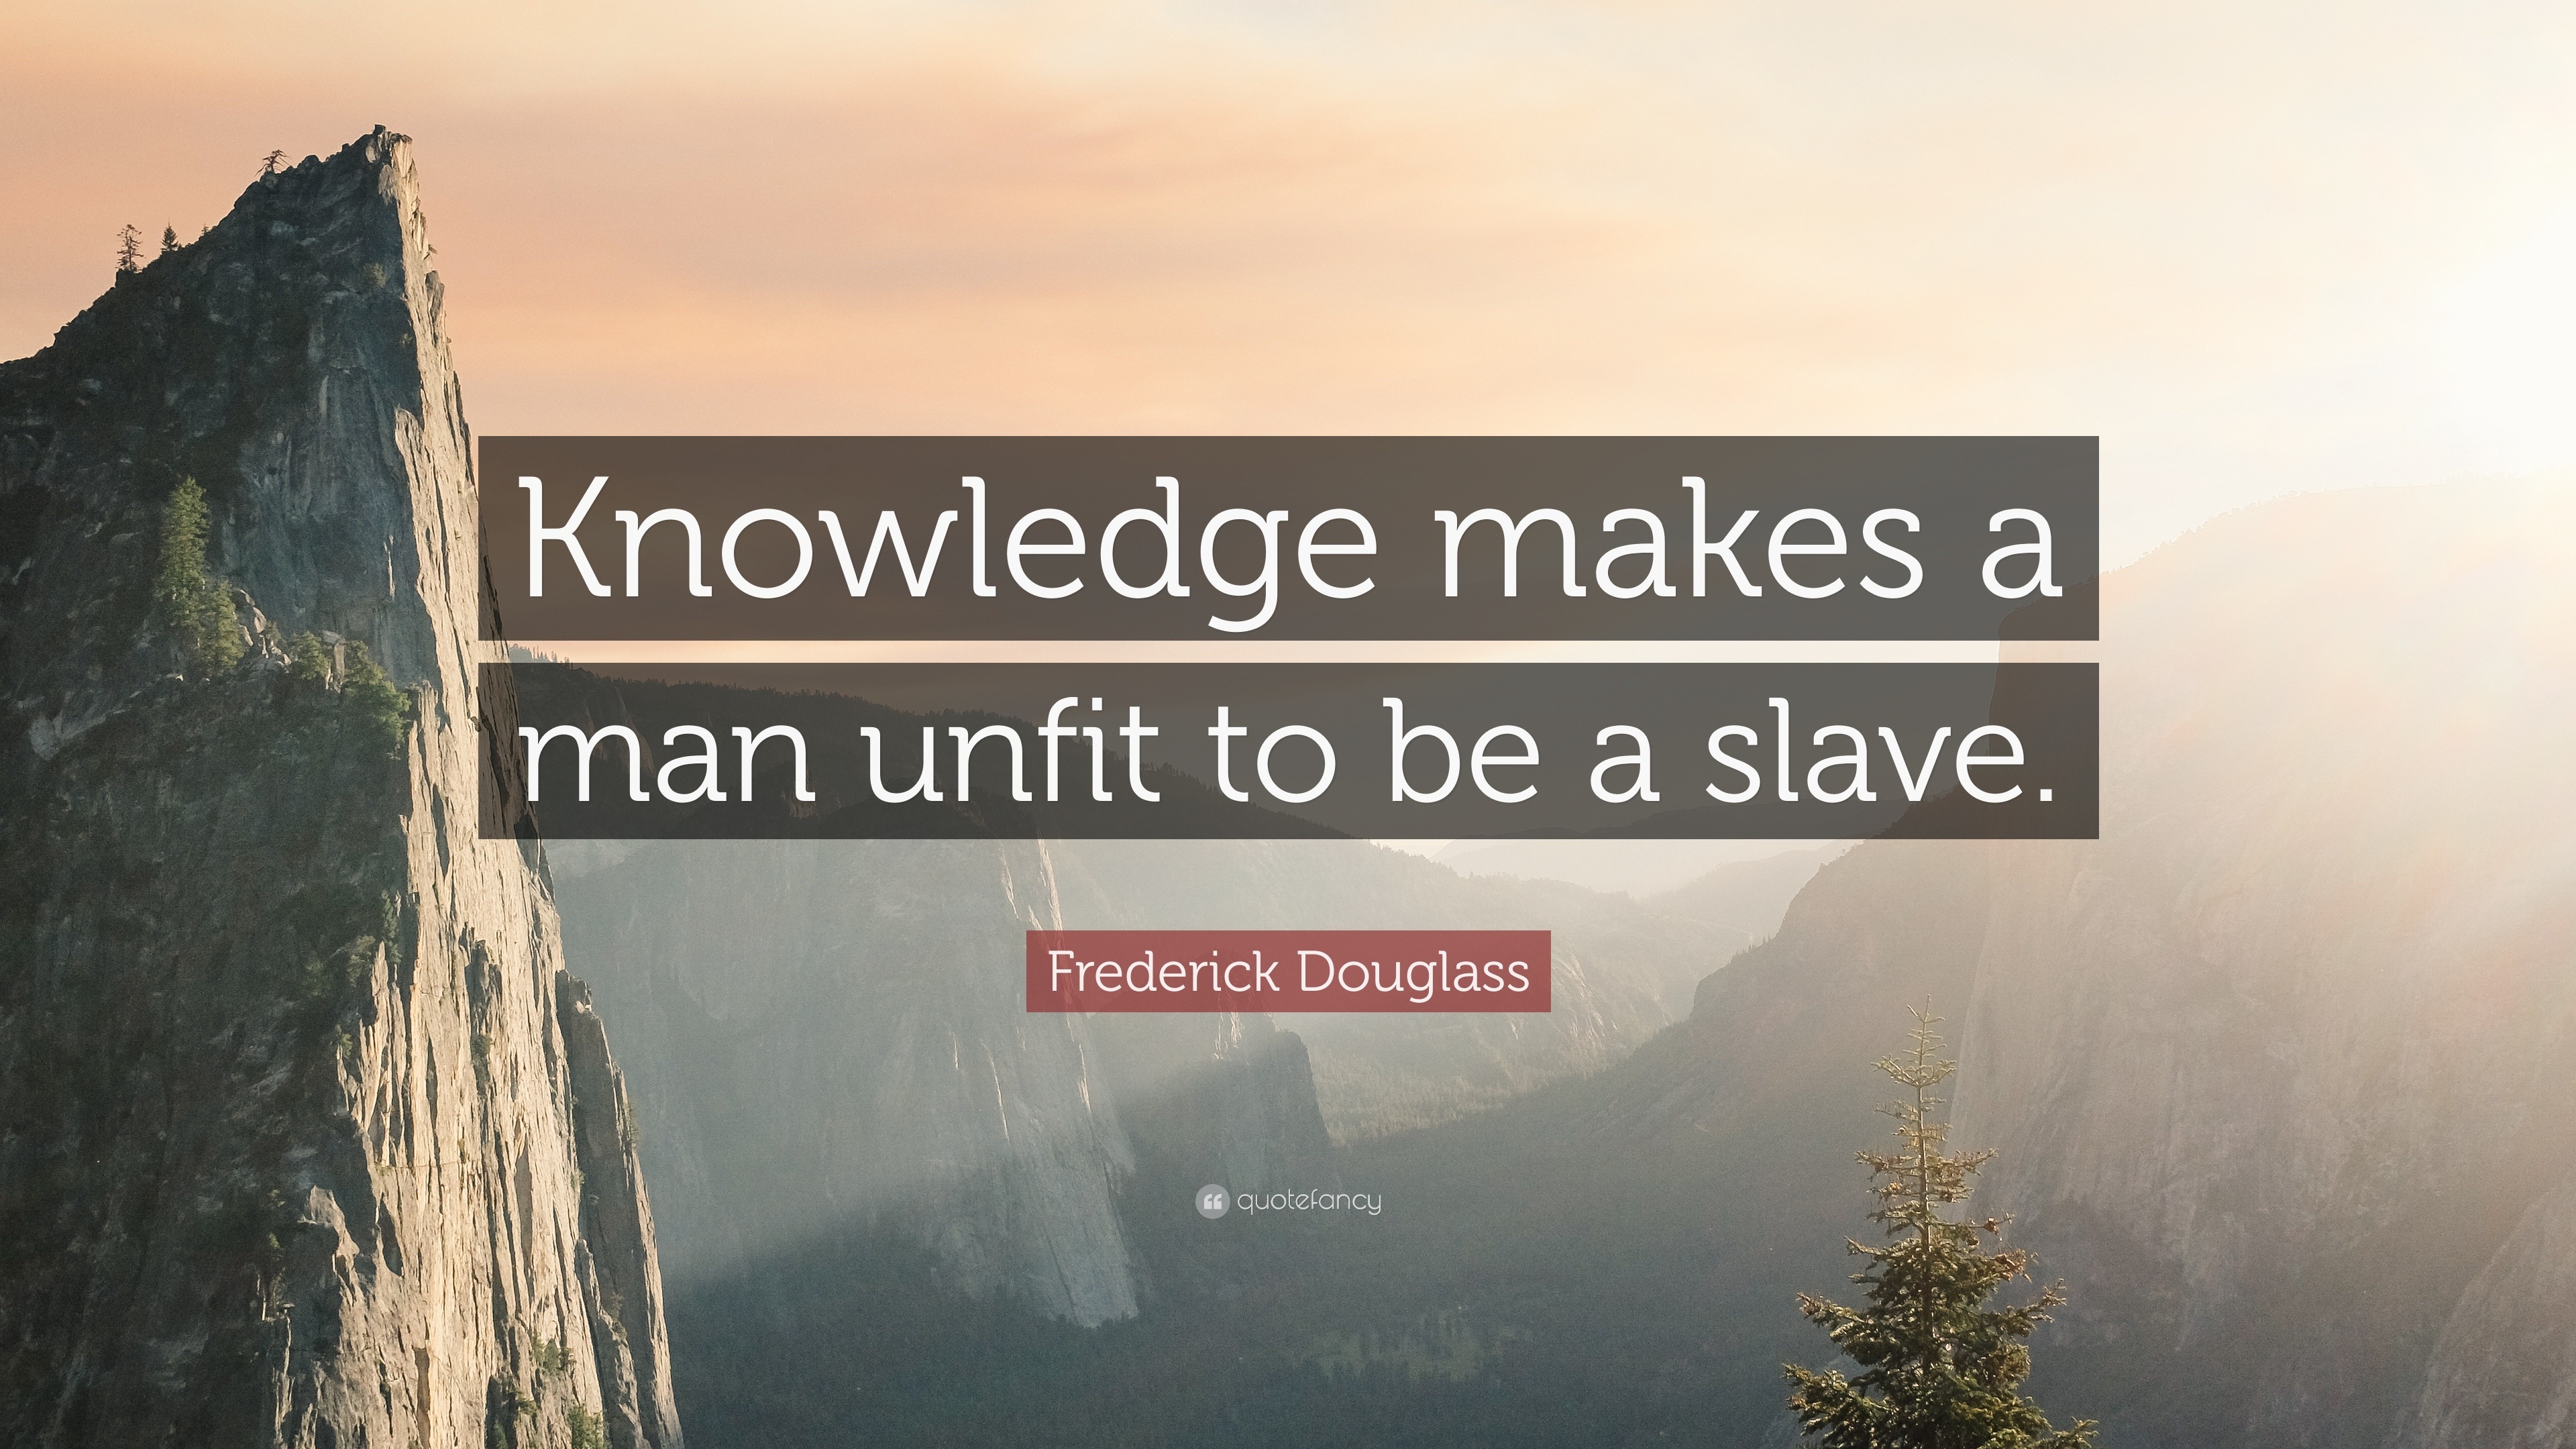 Frederick Douglass Quote: “Knowledge makes a man unfit to be a slave.”